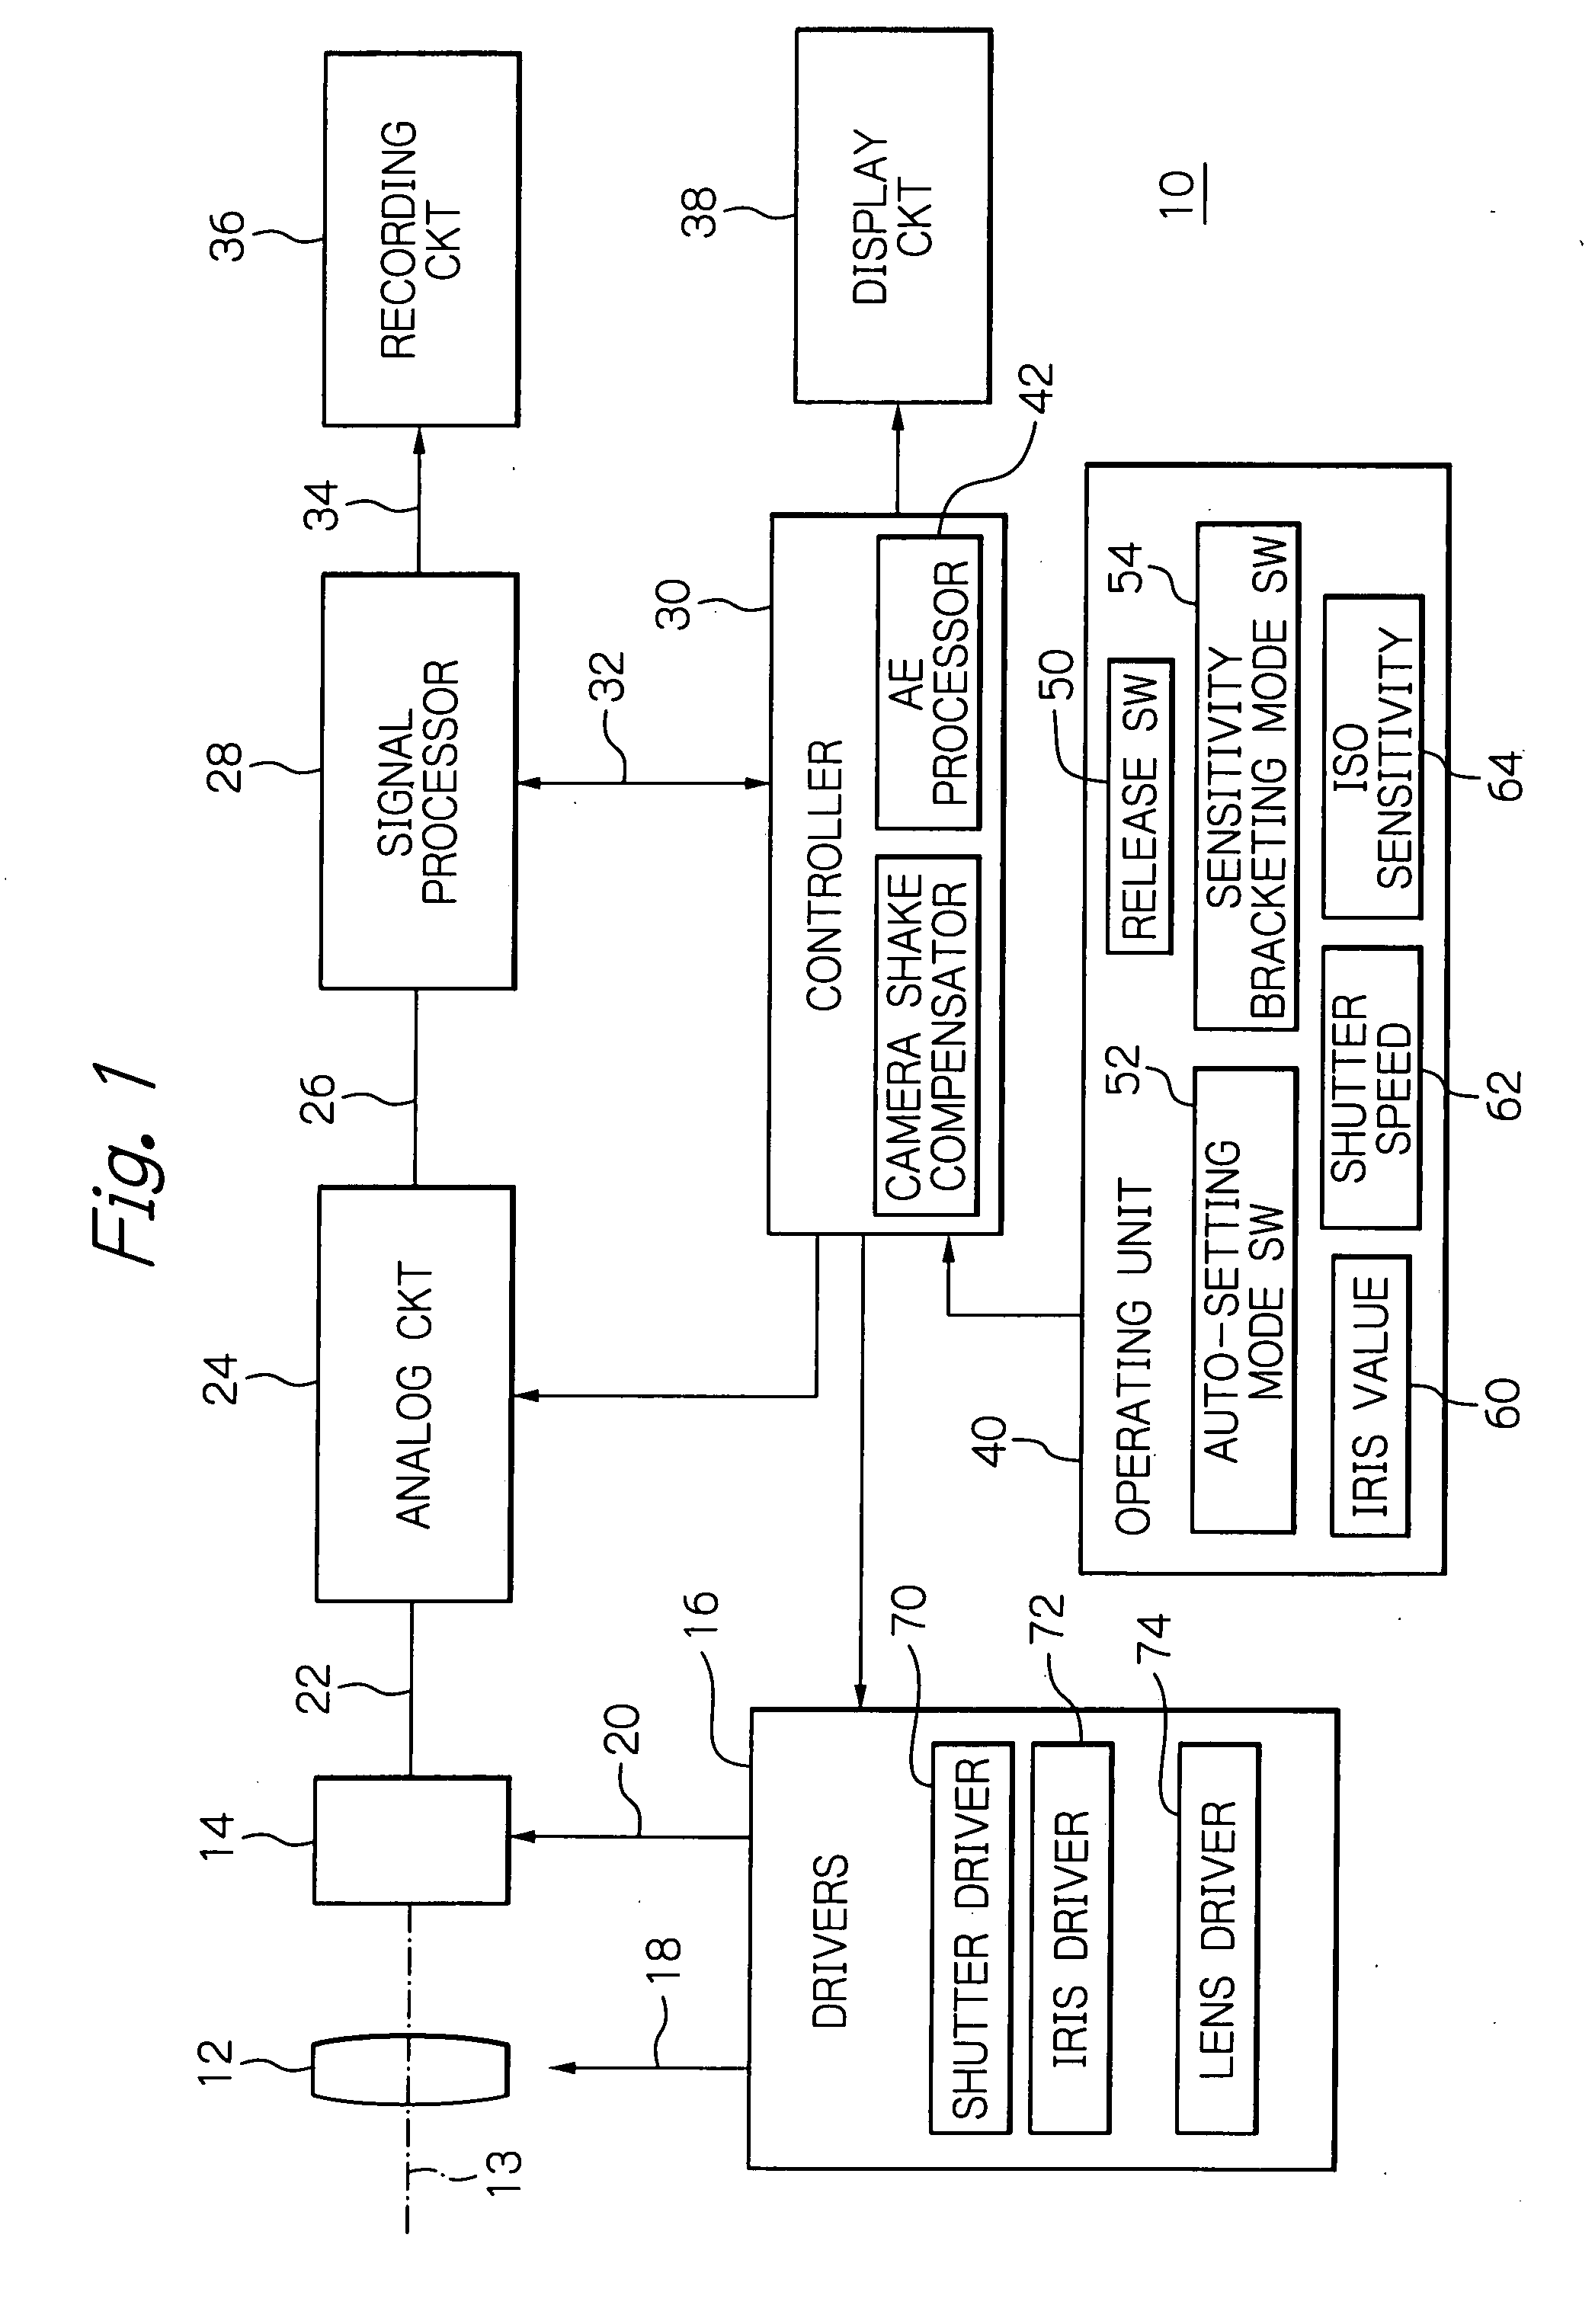 Digital imaging apparatus with camera shake compensation and adaptive sensitivity switching function